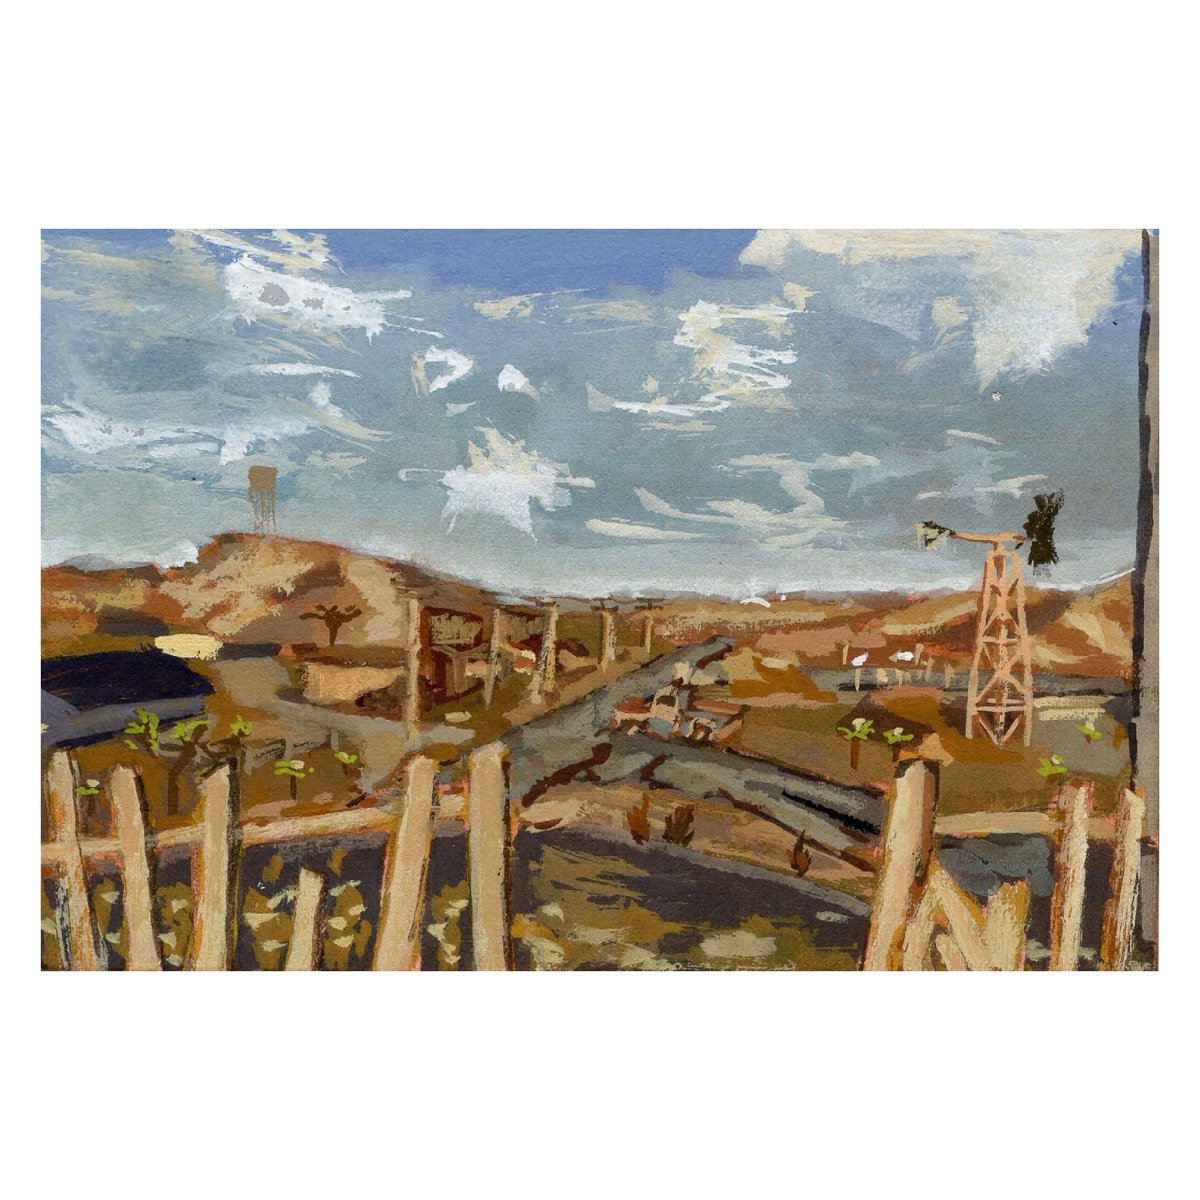 View from Doc Mitchell's House - Fallout New Vegas
Gouache on cotton, 4”x 6”